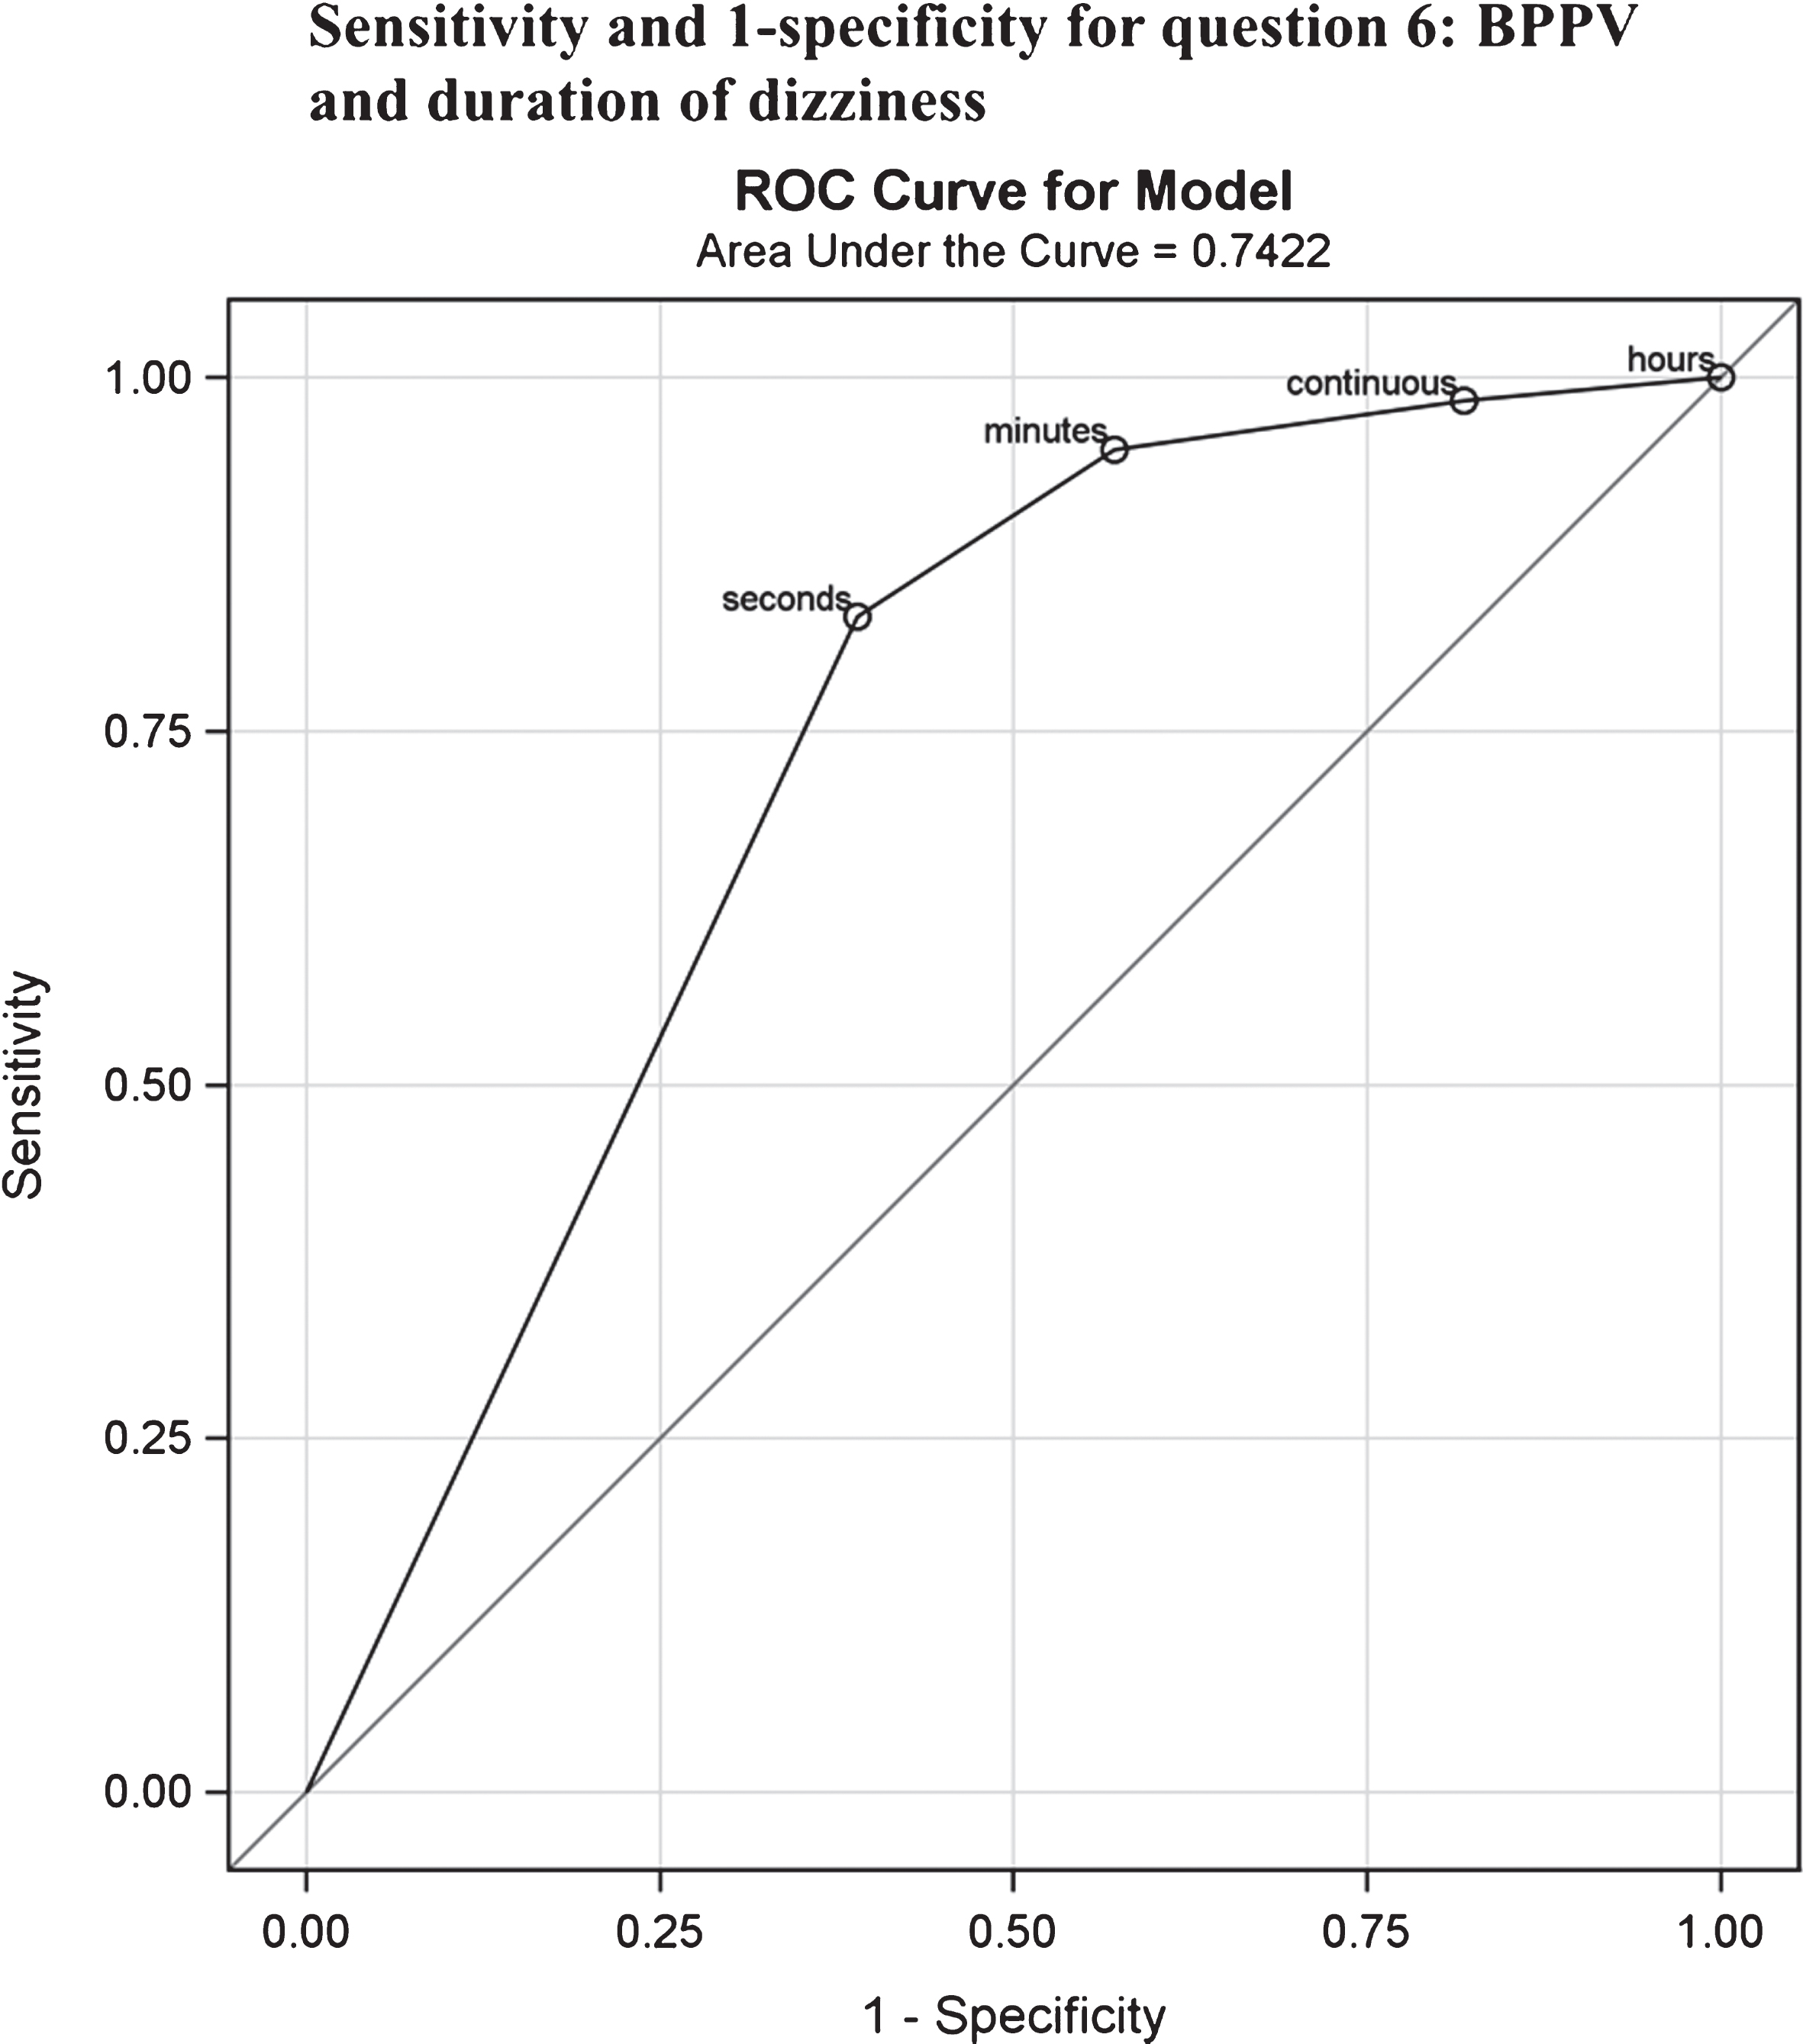 ROC-curve describing the sensitivity and 1-specificity for question 6: BPPV and duration of dizziness. ROC = Receiver operating curve.